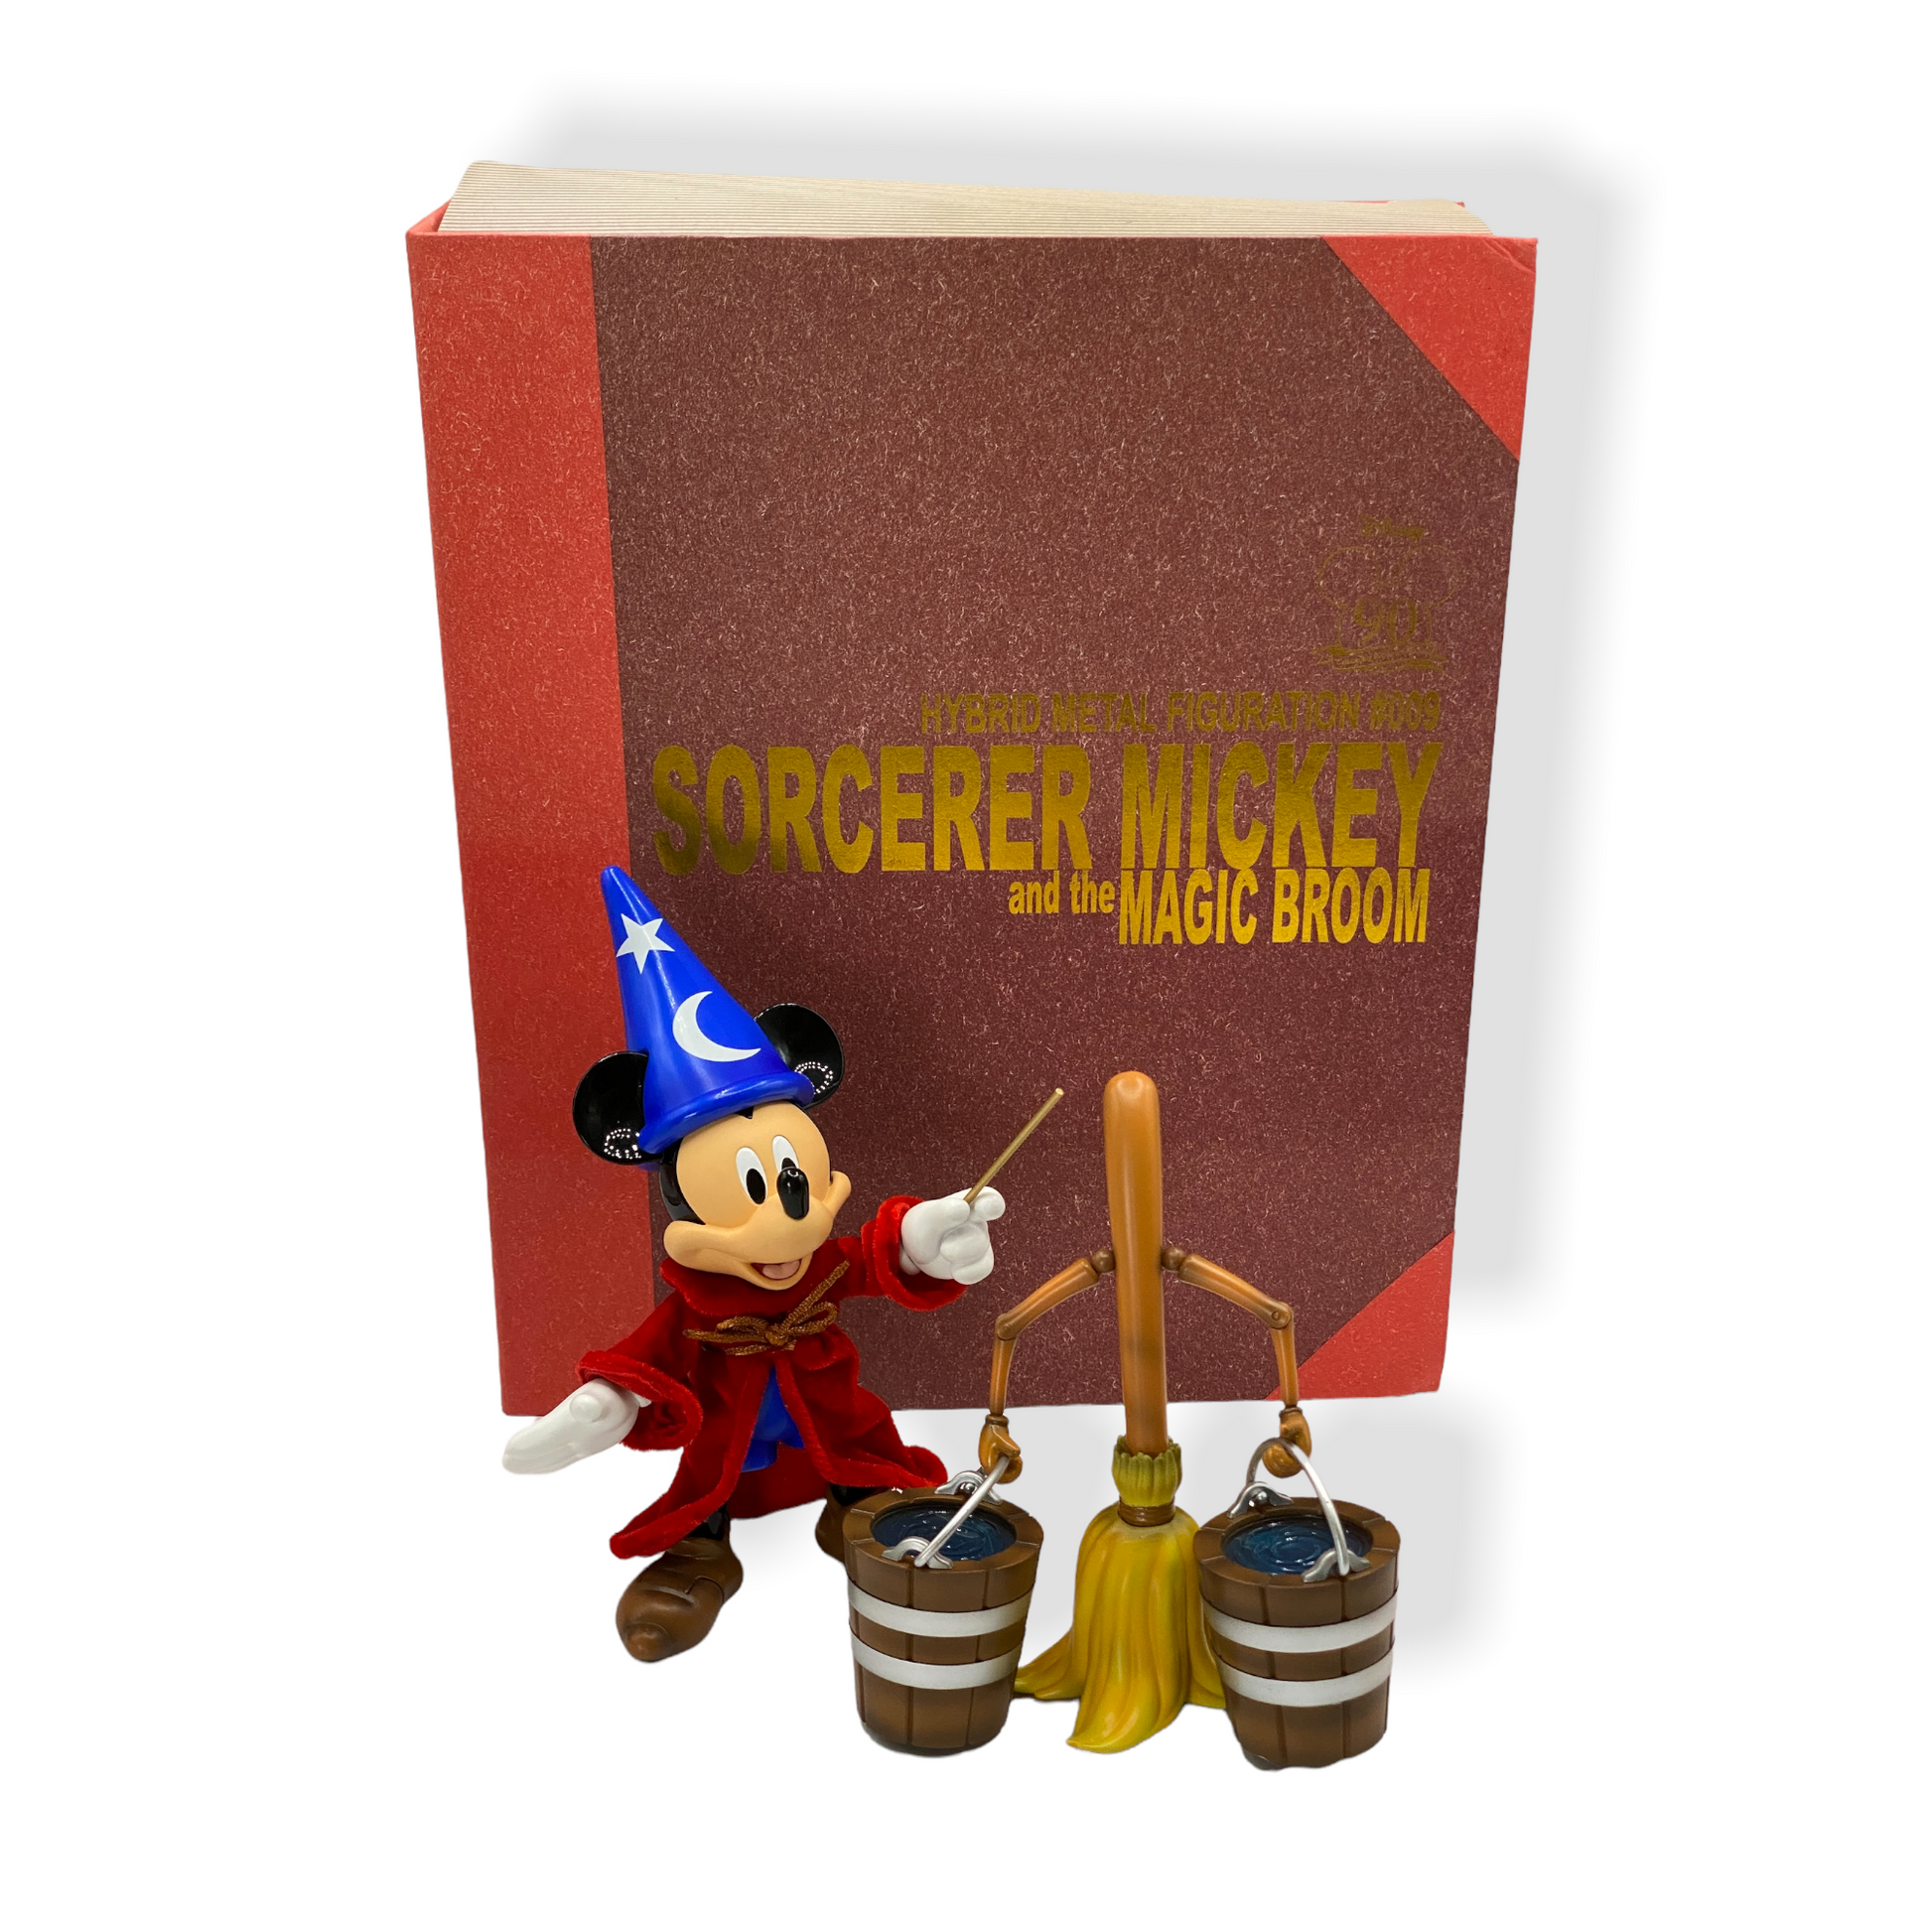 Sorcerer Mickey and The Magic Broom